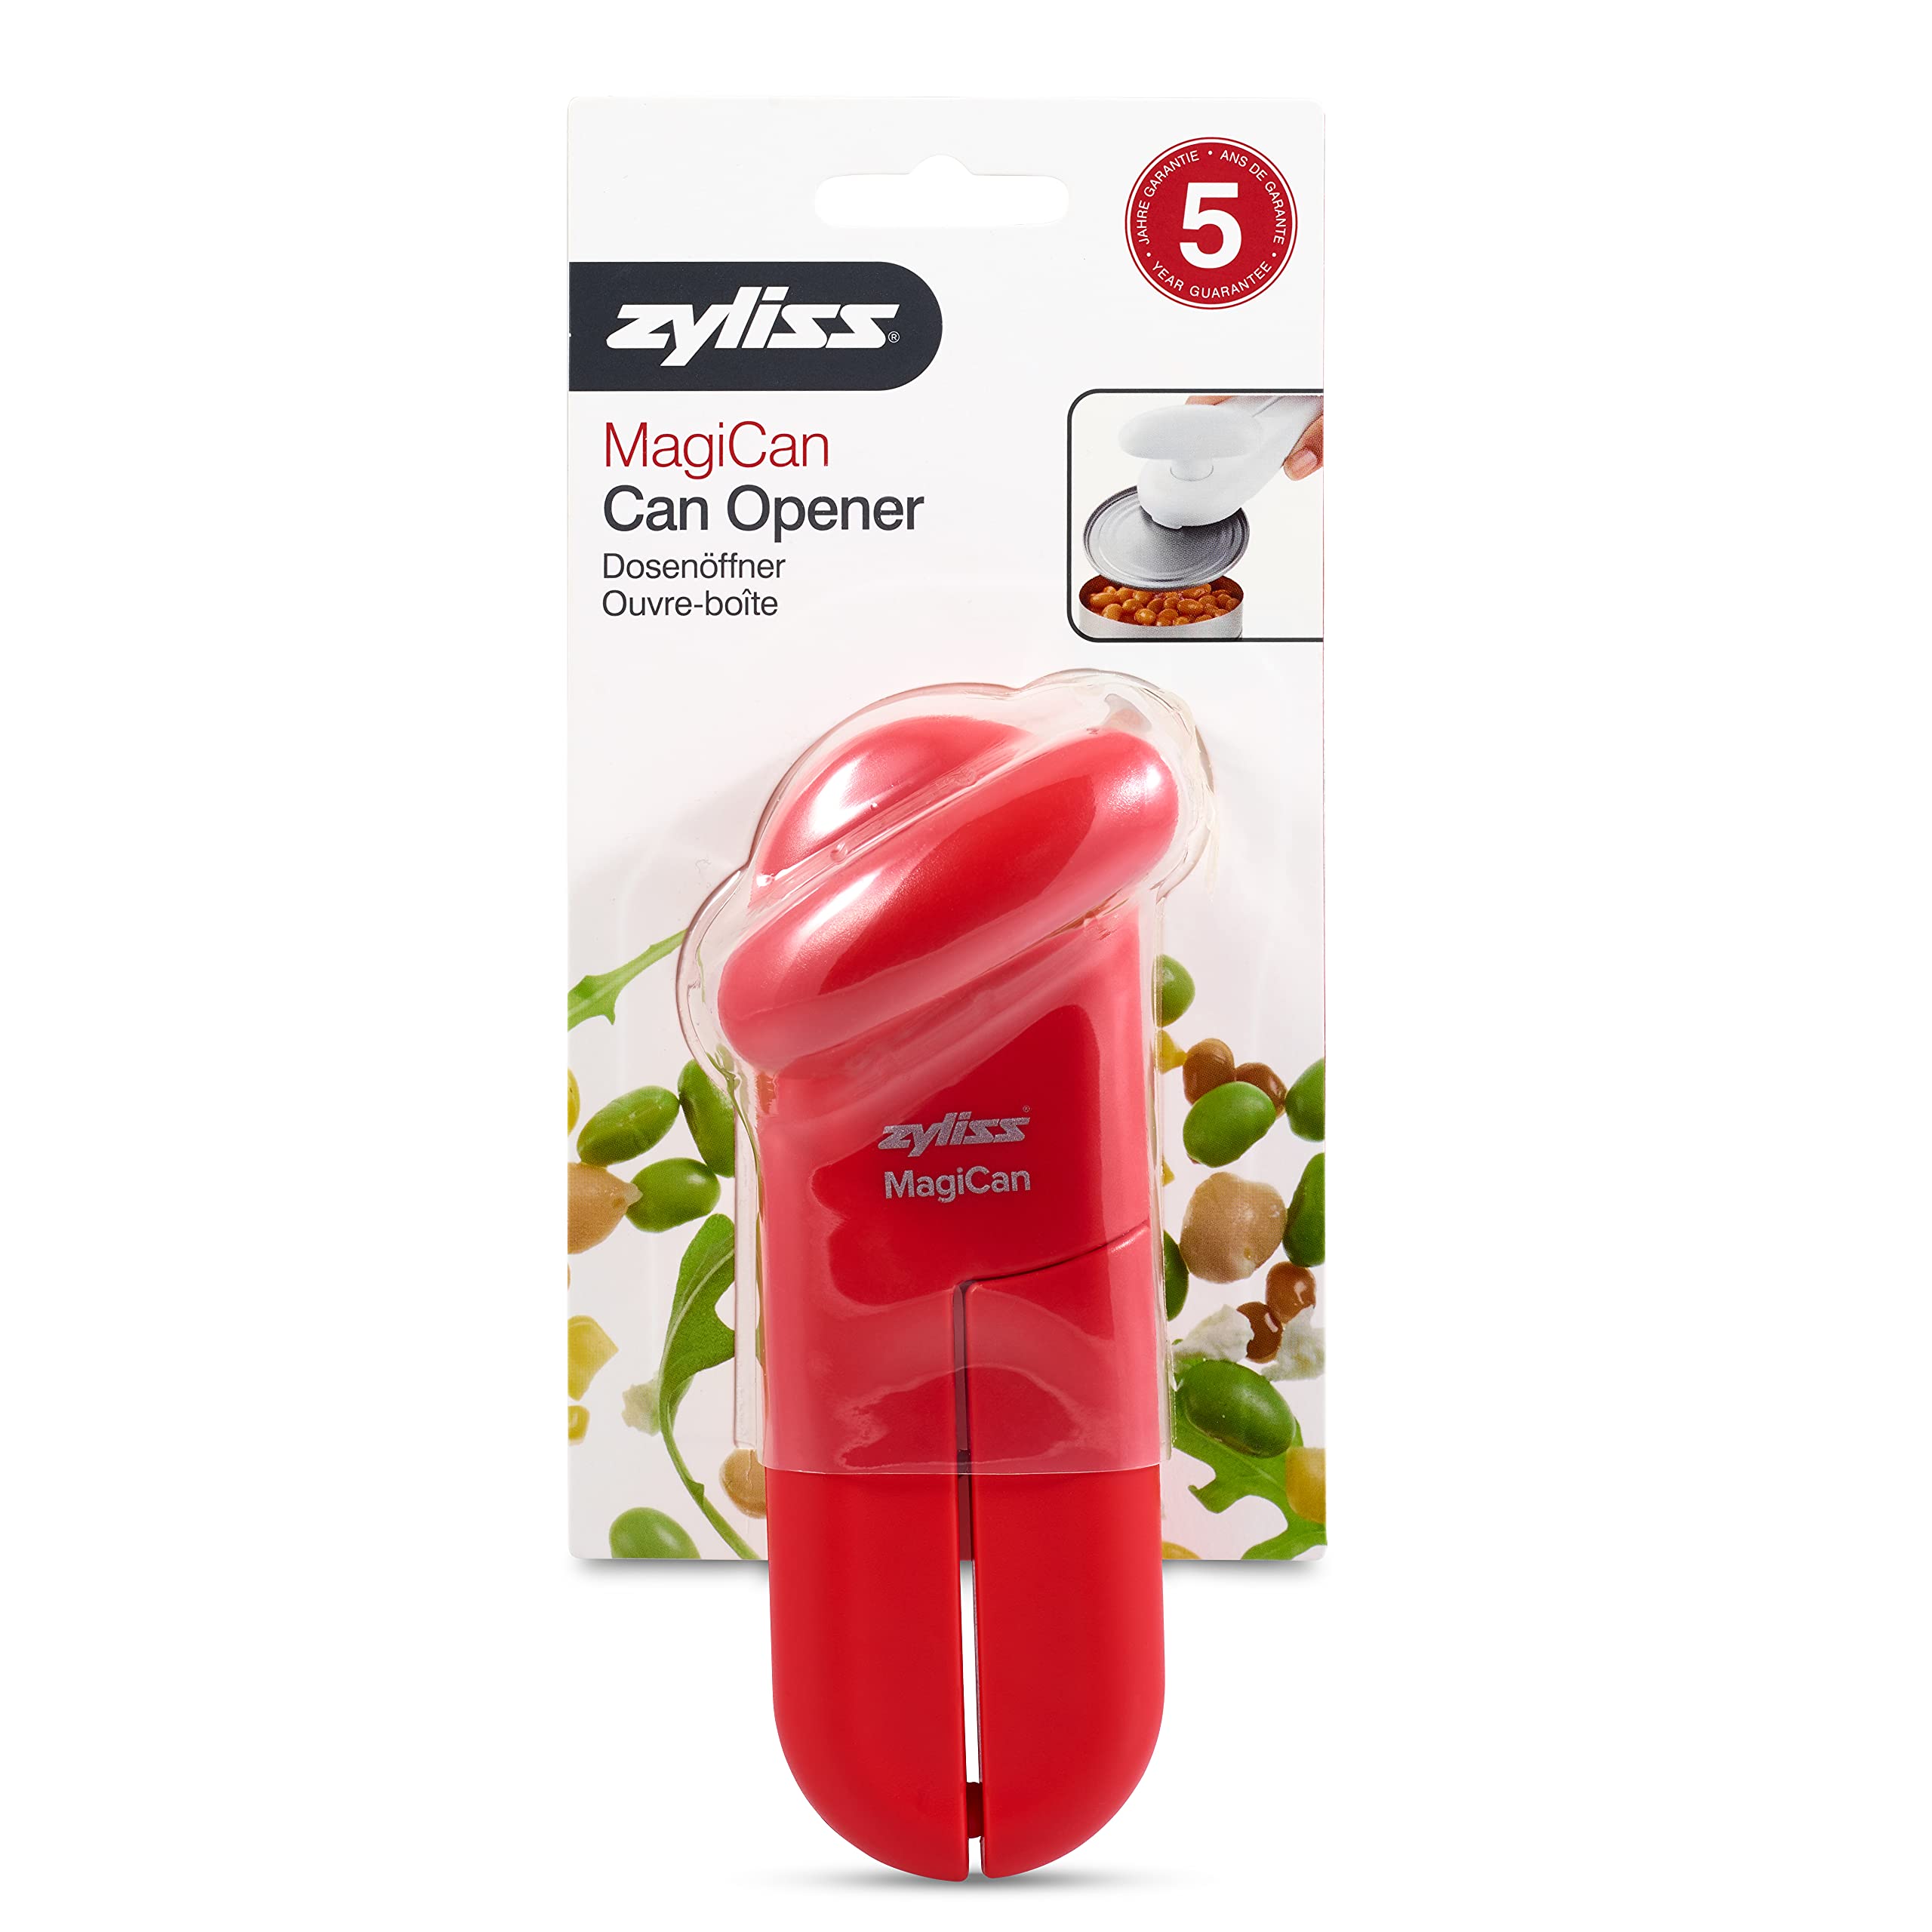 ZYLISS MagiCan Manual Can Opener with Lid Release - Red